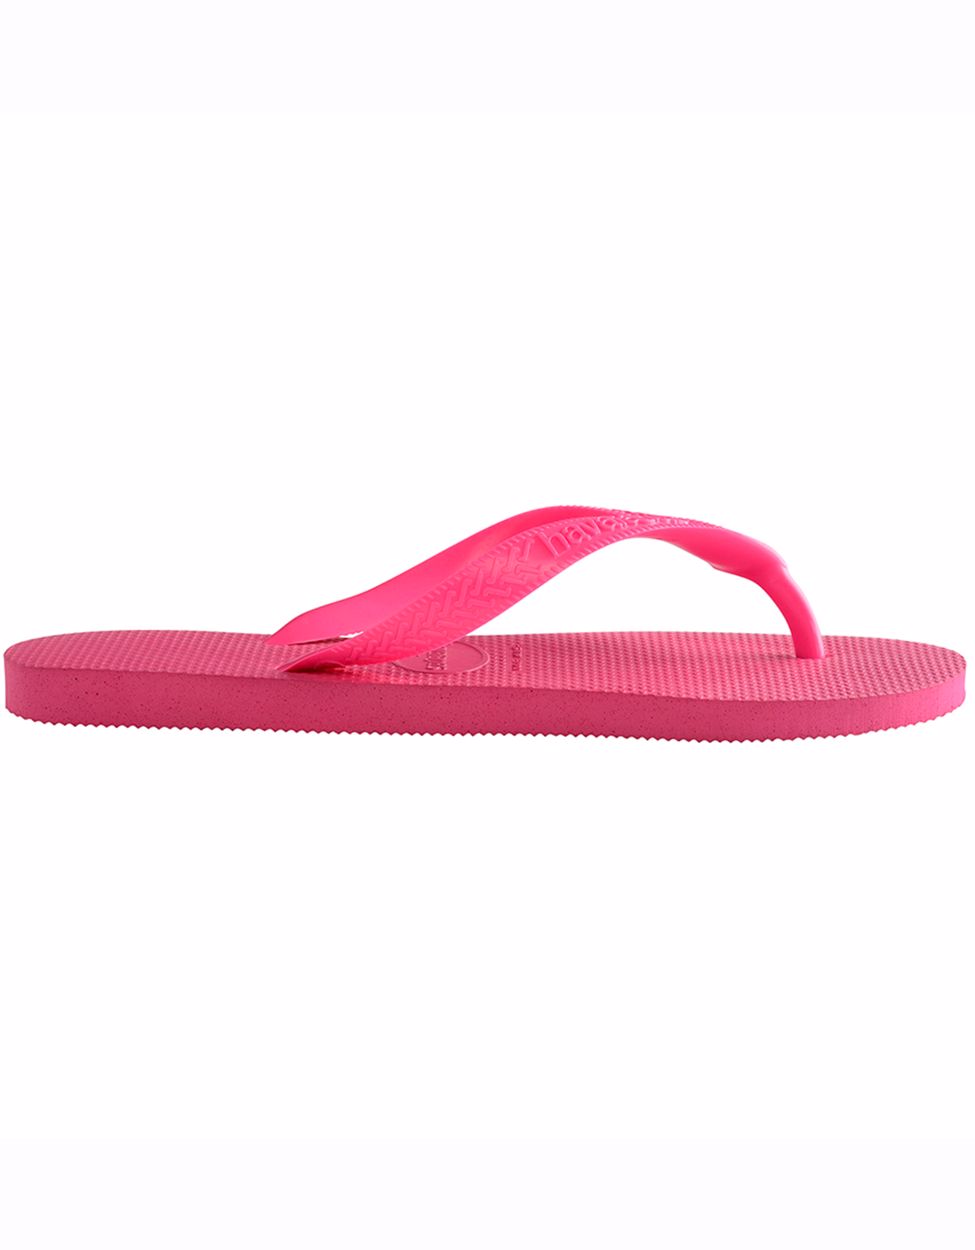 Havaianas Unisex Slippers - Pink Electric